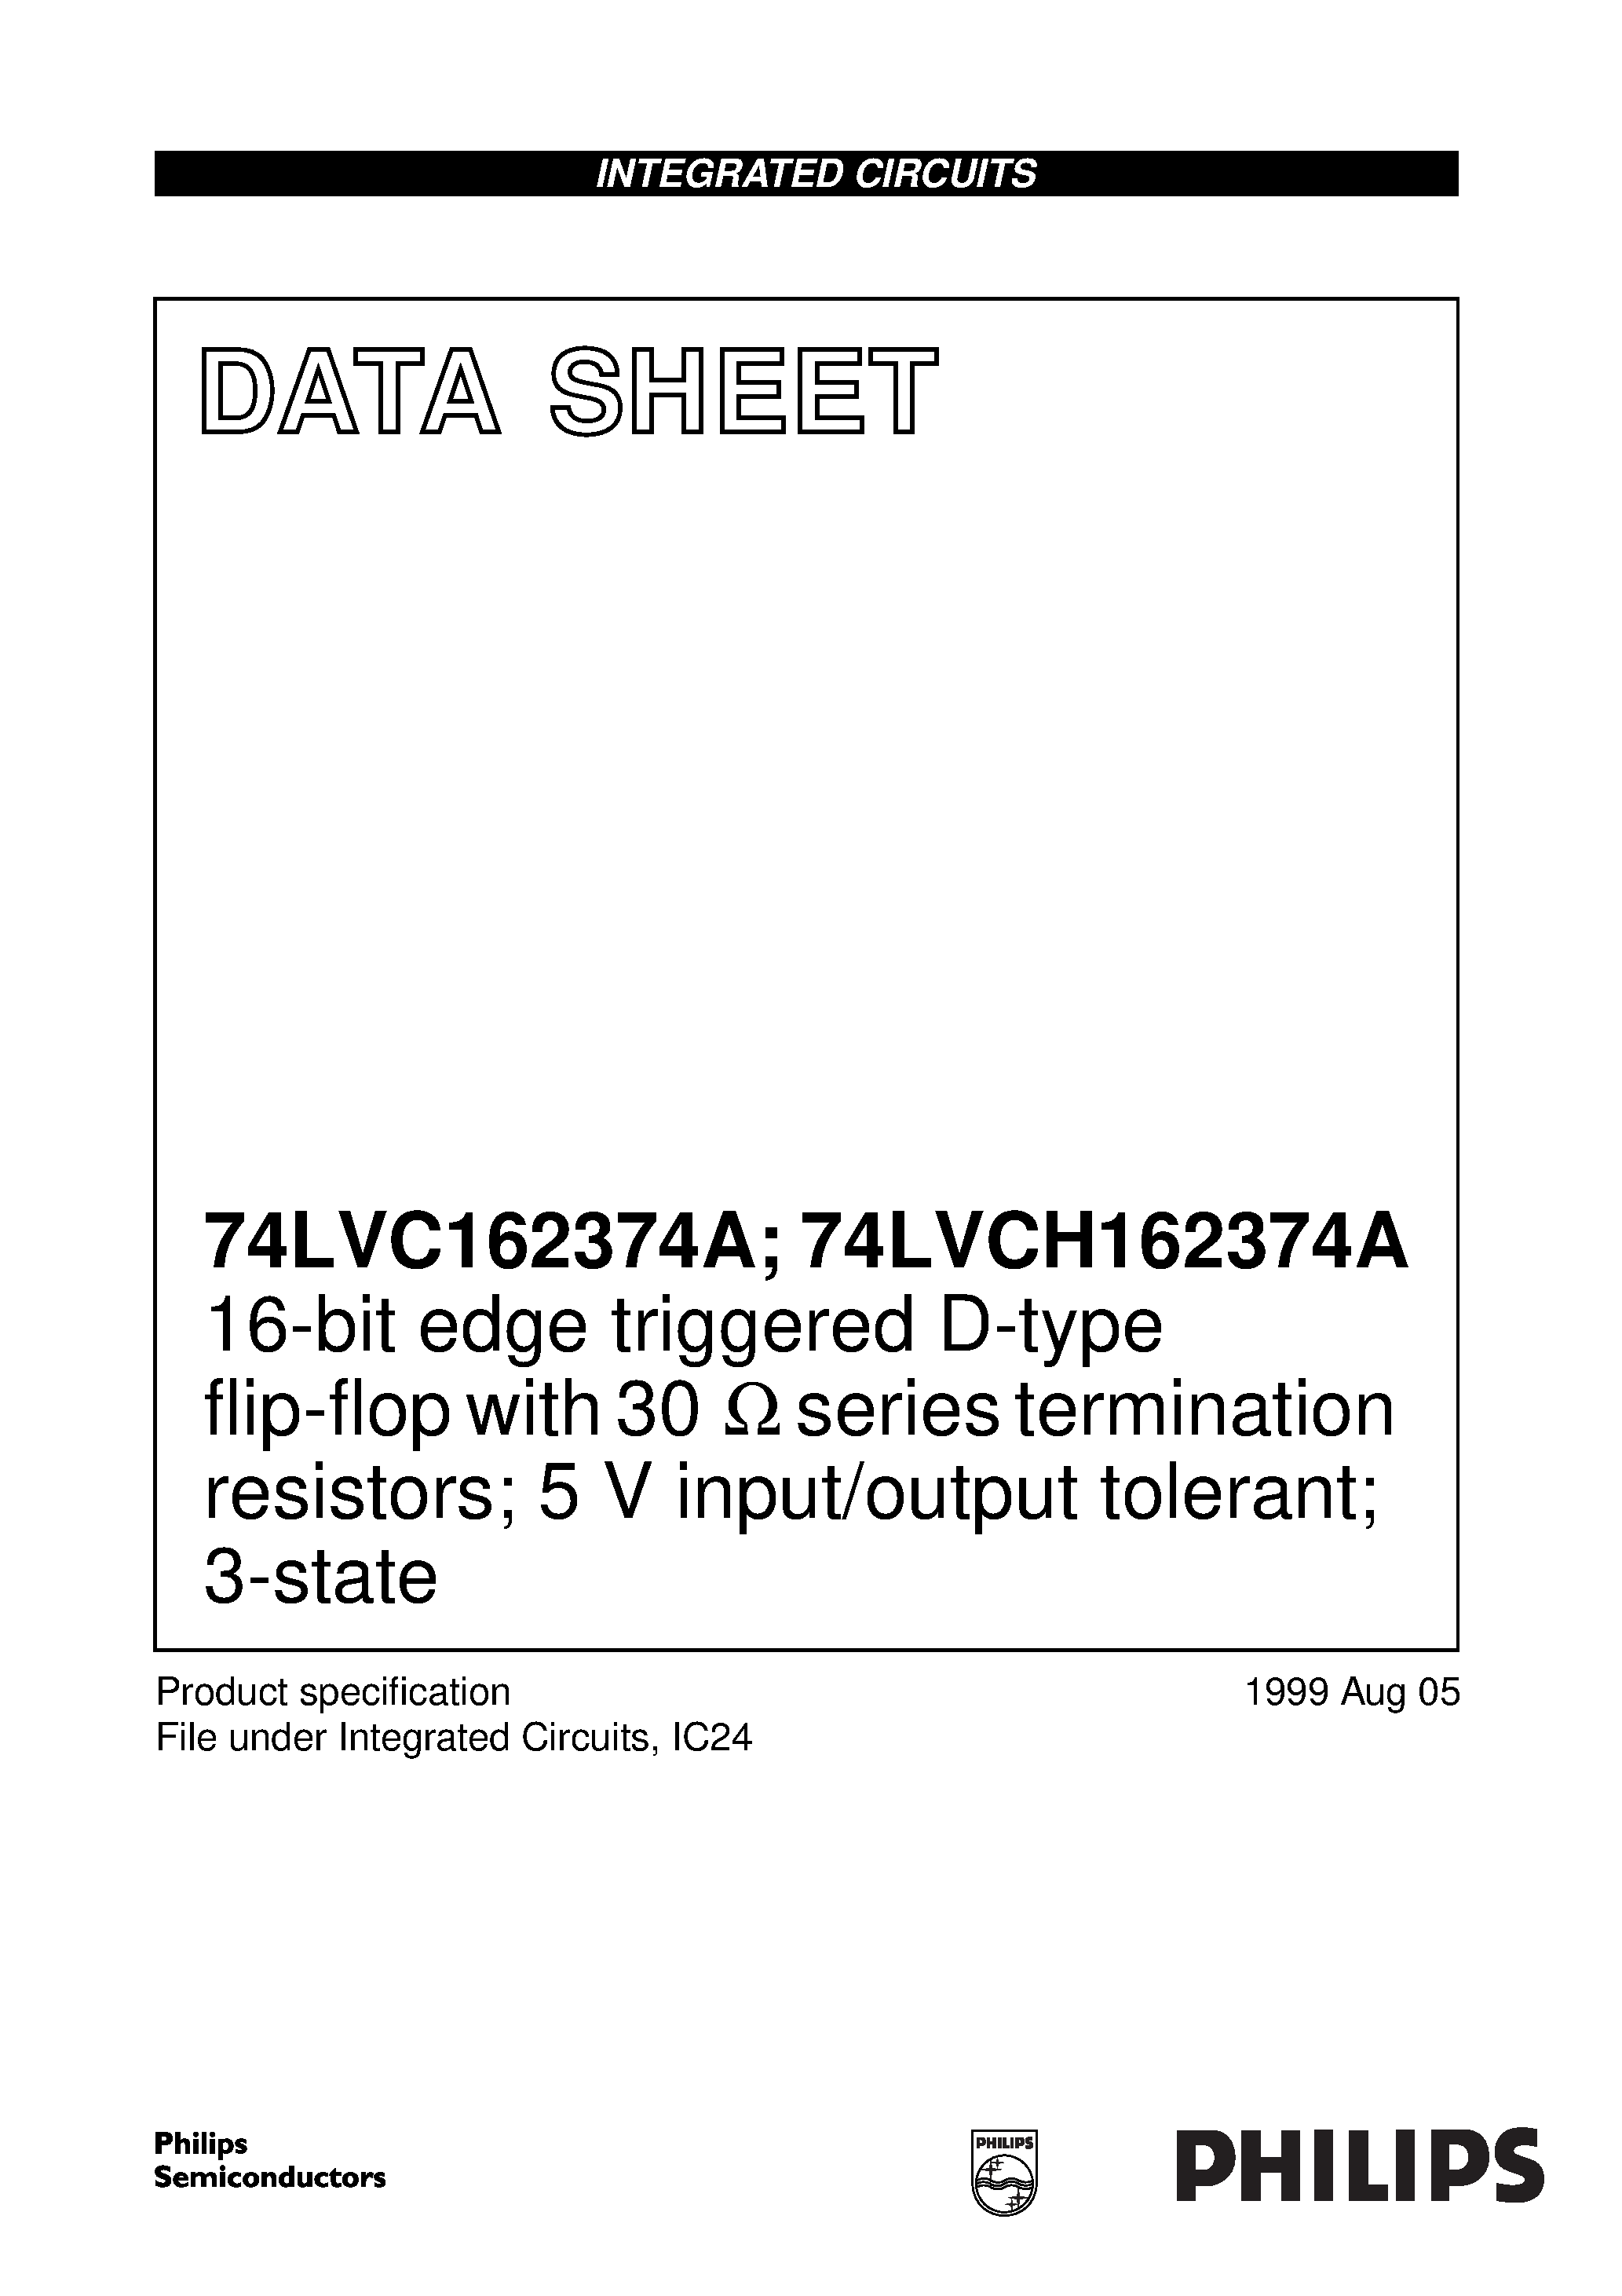 Datasheet VC162374ADL - 16-bit edge triggered D-type flip-flop with 30 ohmseries termination resistors; 5 V input/output tolerant; 3-state page 1